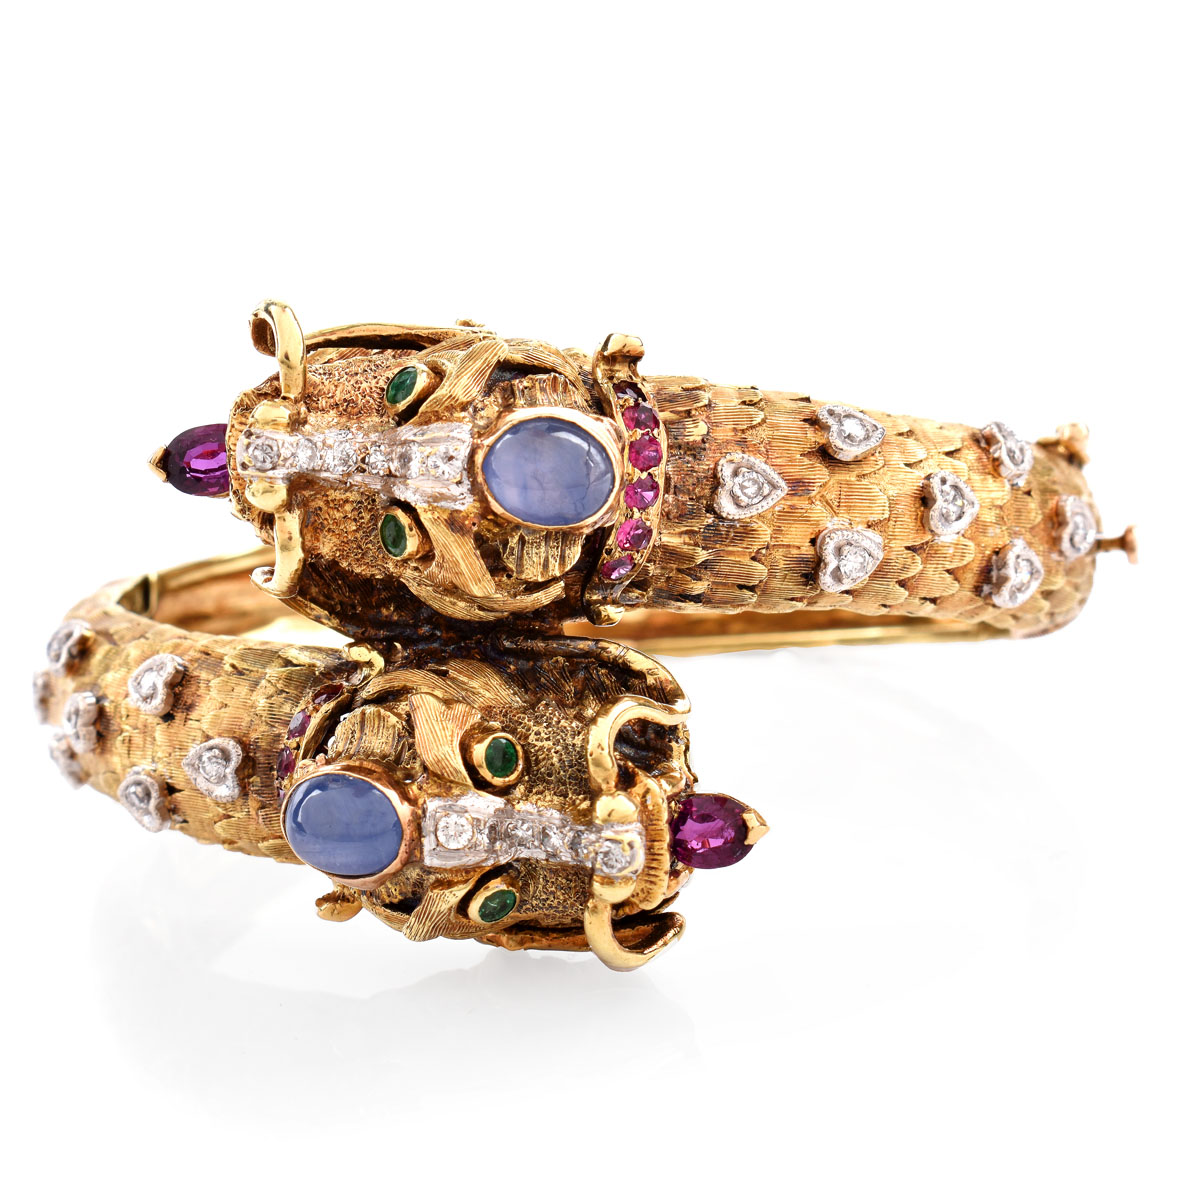 Vintage Heavy 14 Karat Yellow Gold Dragon Hinged Bangle Accented throughout with Cabochon Sapphires, Diamonds, Rubies and Emeralds. Stamped 14K JG JLRY.